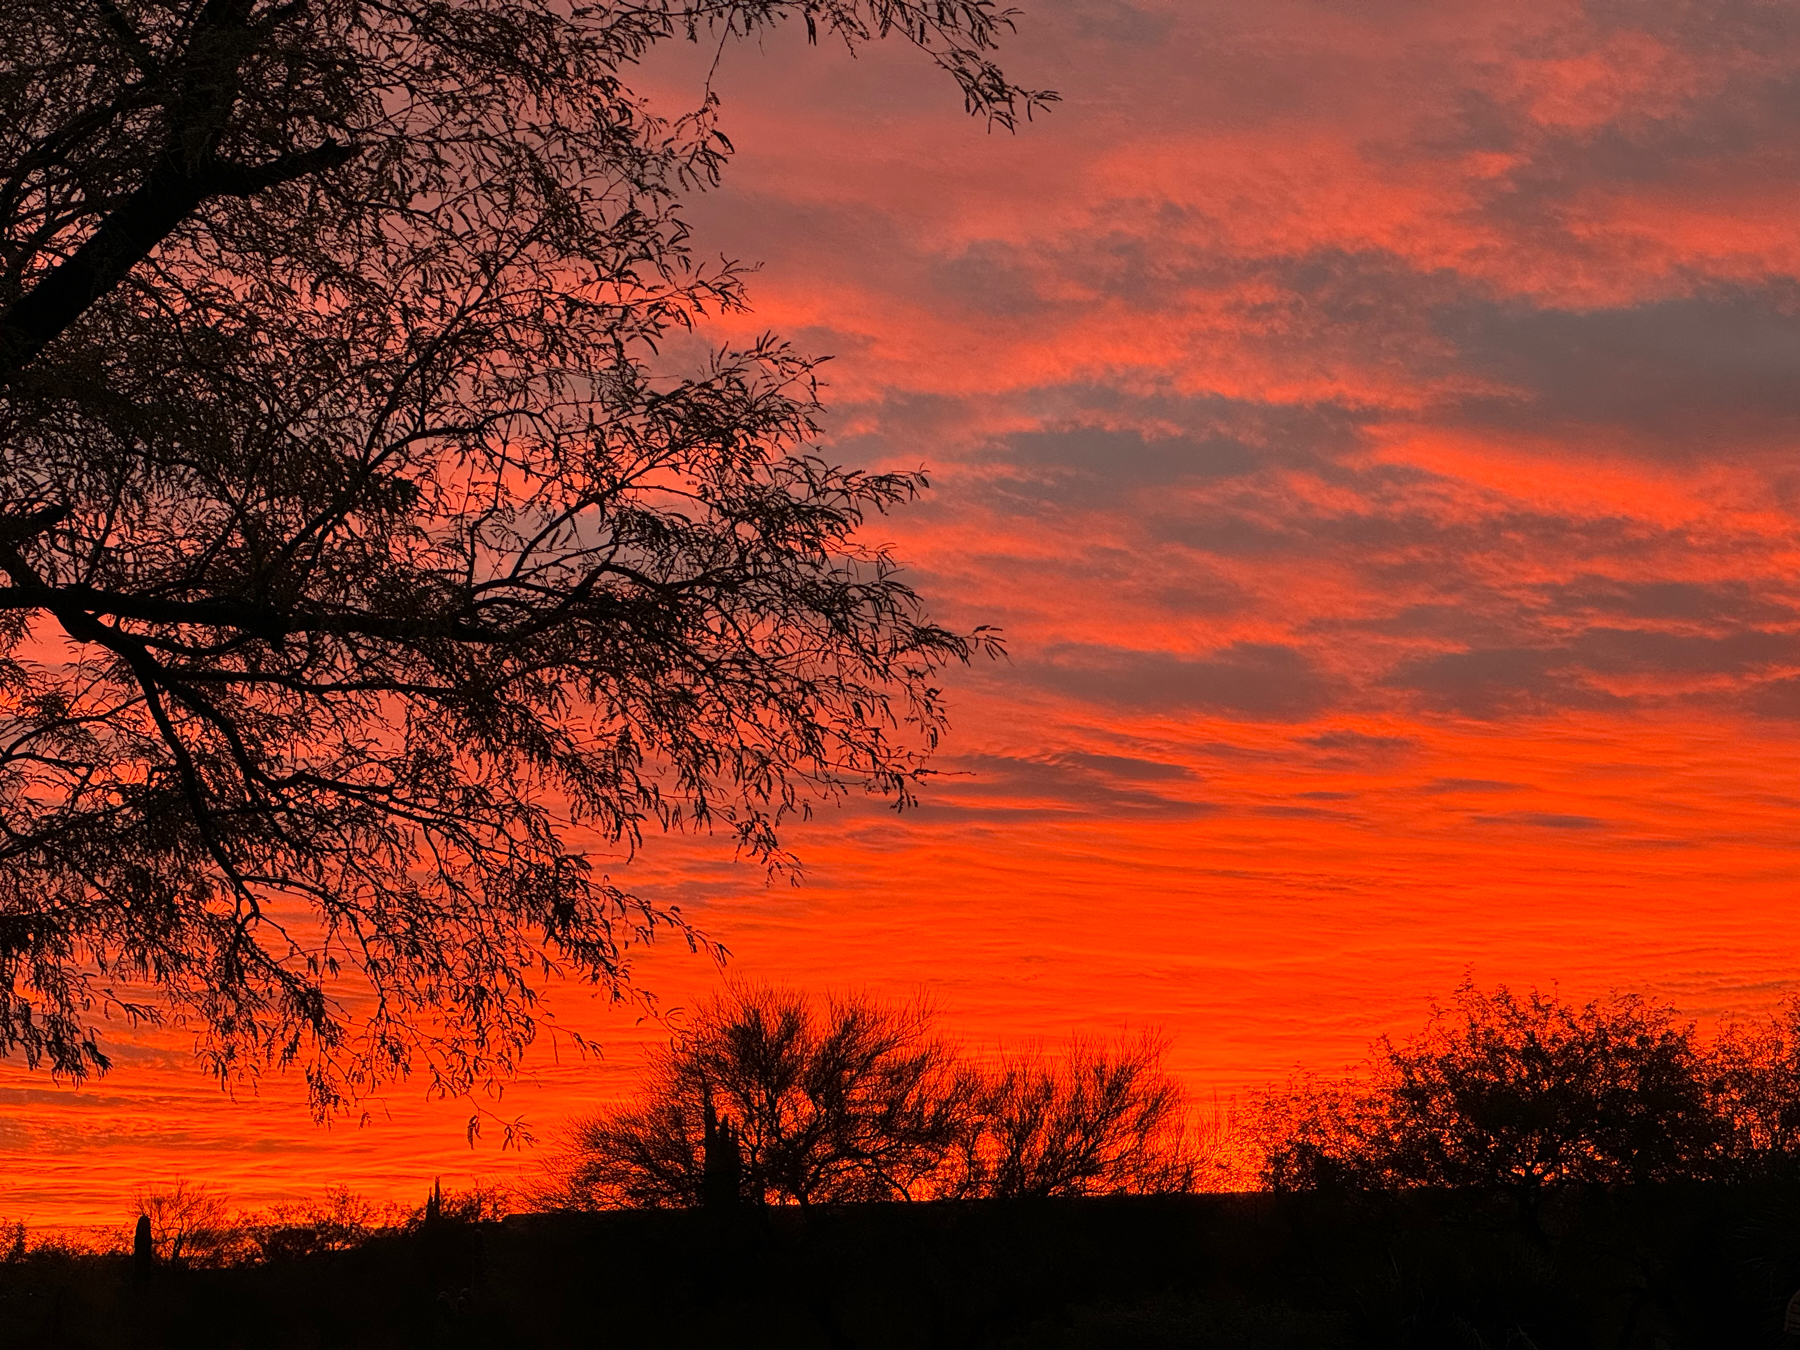 Sunset sky with vibrant orange and red colors, silhouetted tree branches in the foreground, and desert vegetation on the horizon.